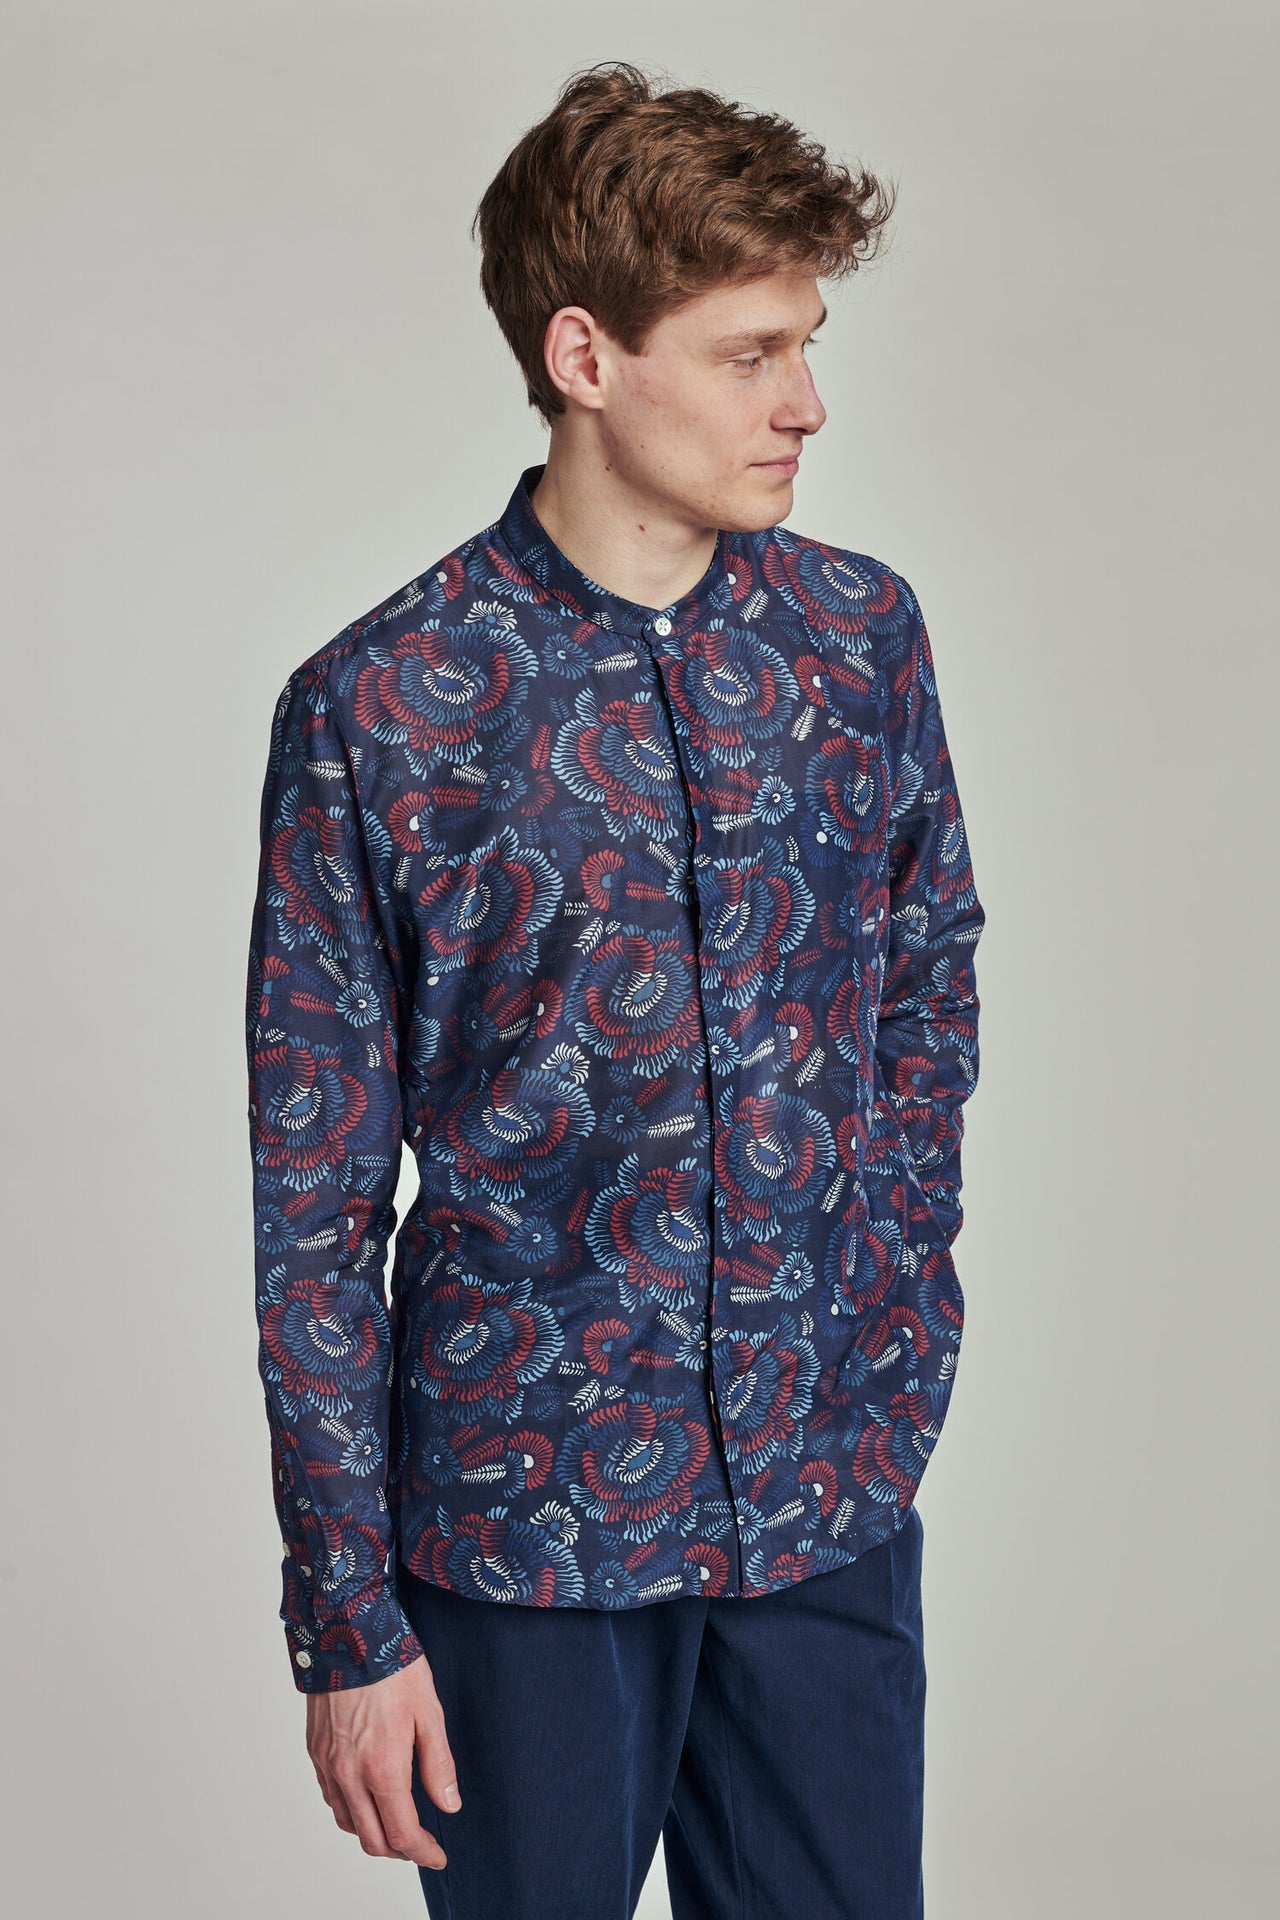 Zen Grandad Collar Shirt in an Airy Blue, Red and White Italian Cotton and Silk